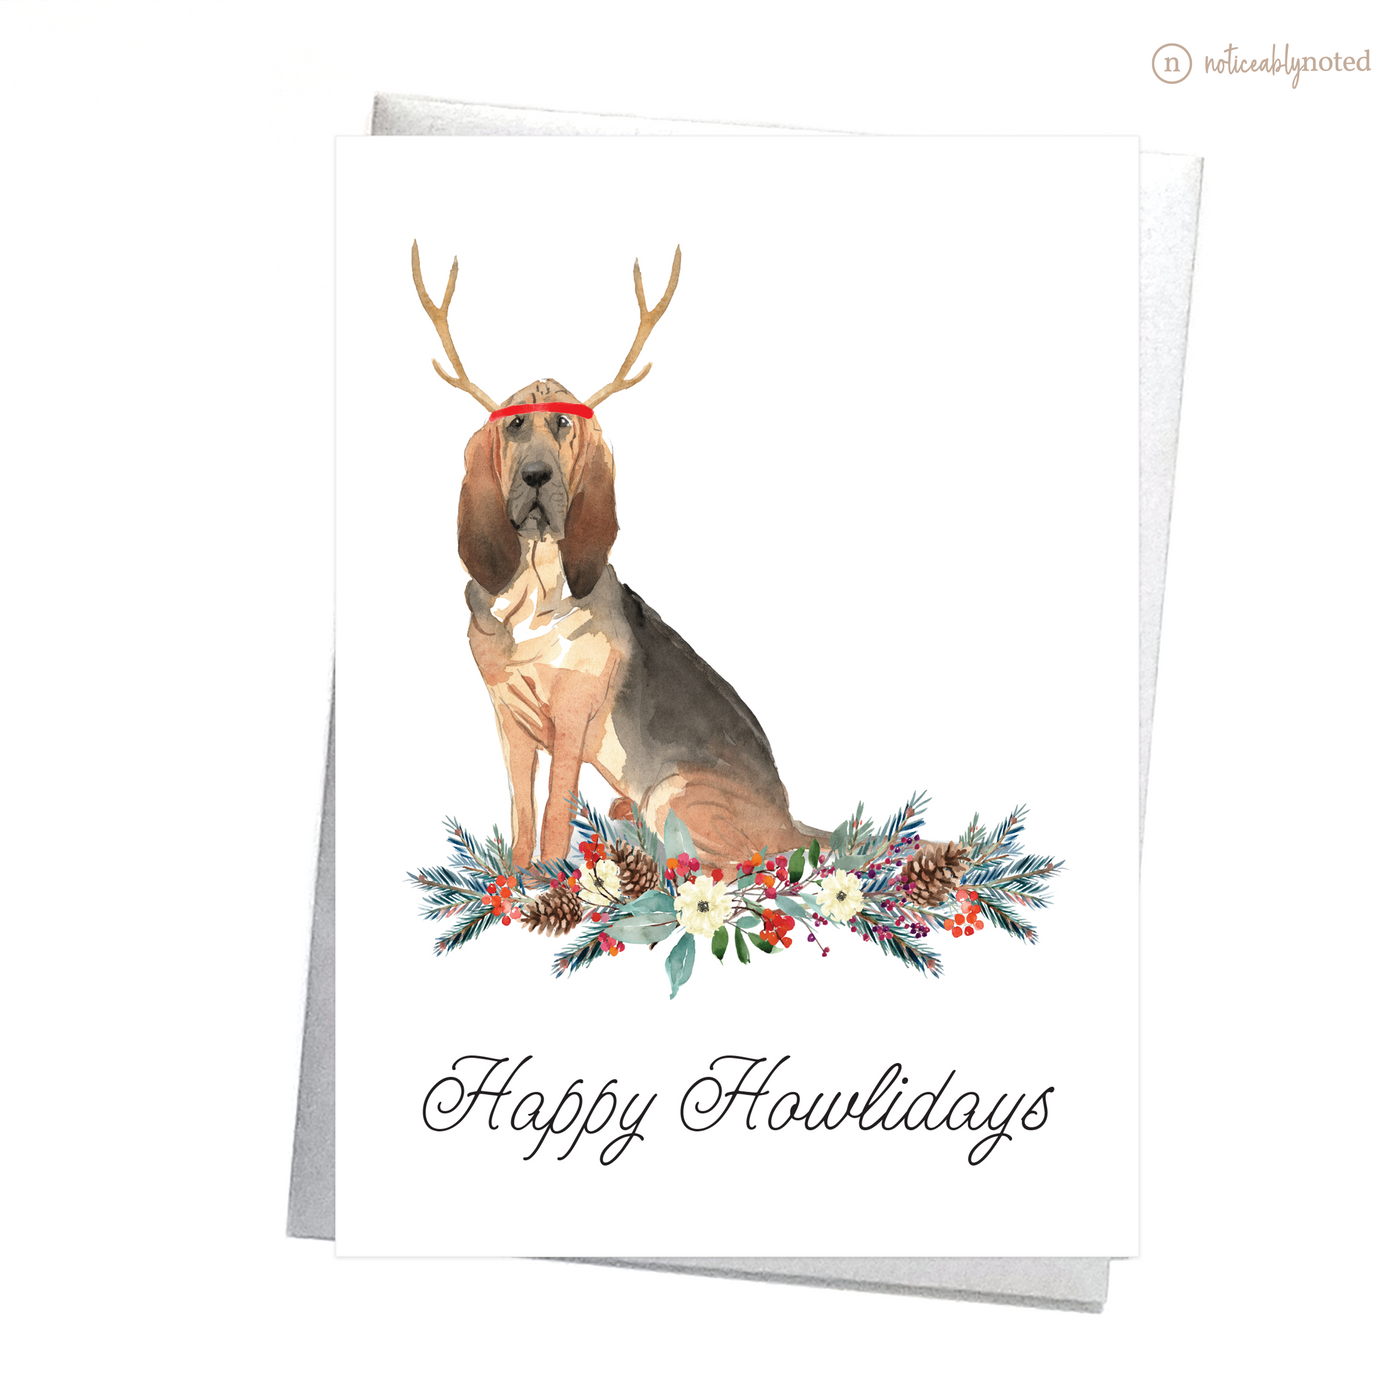 Bloodhound Dog Christmas Card | Noticeably Noted